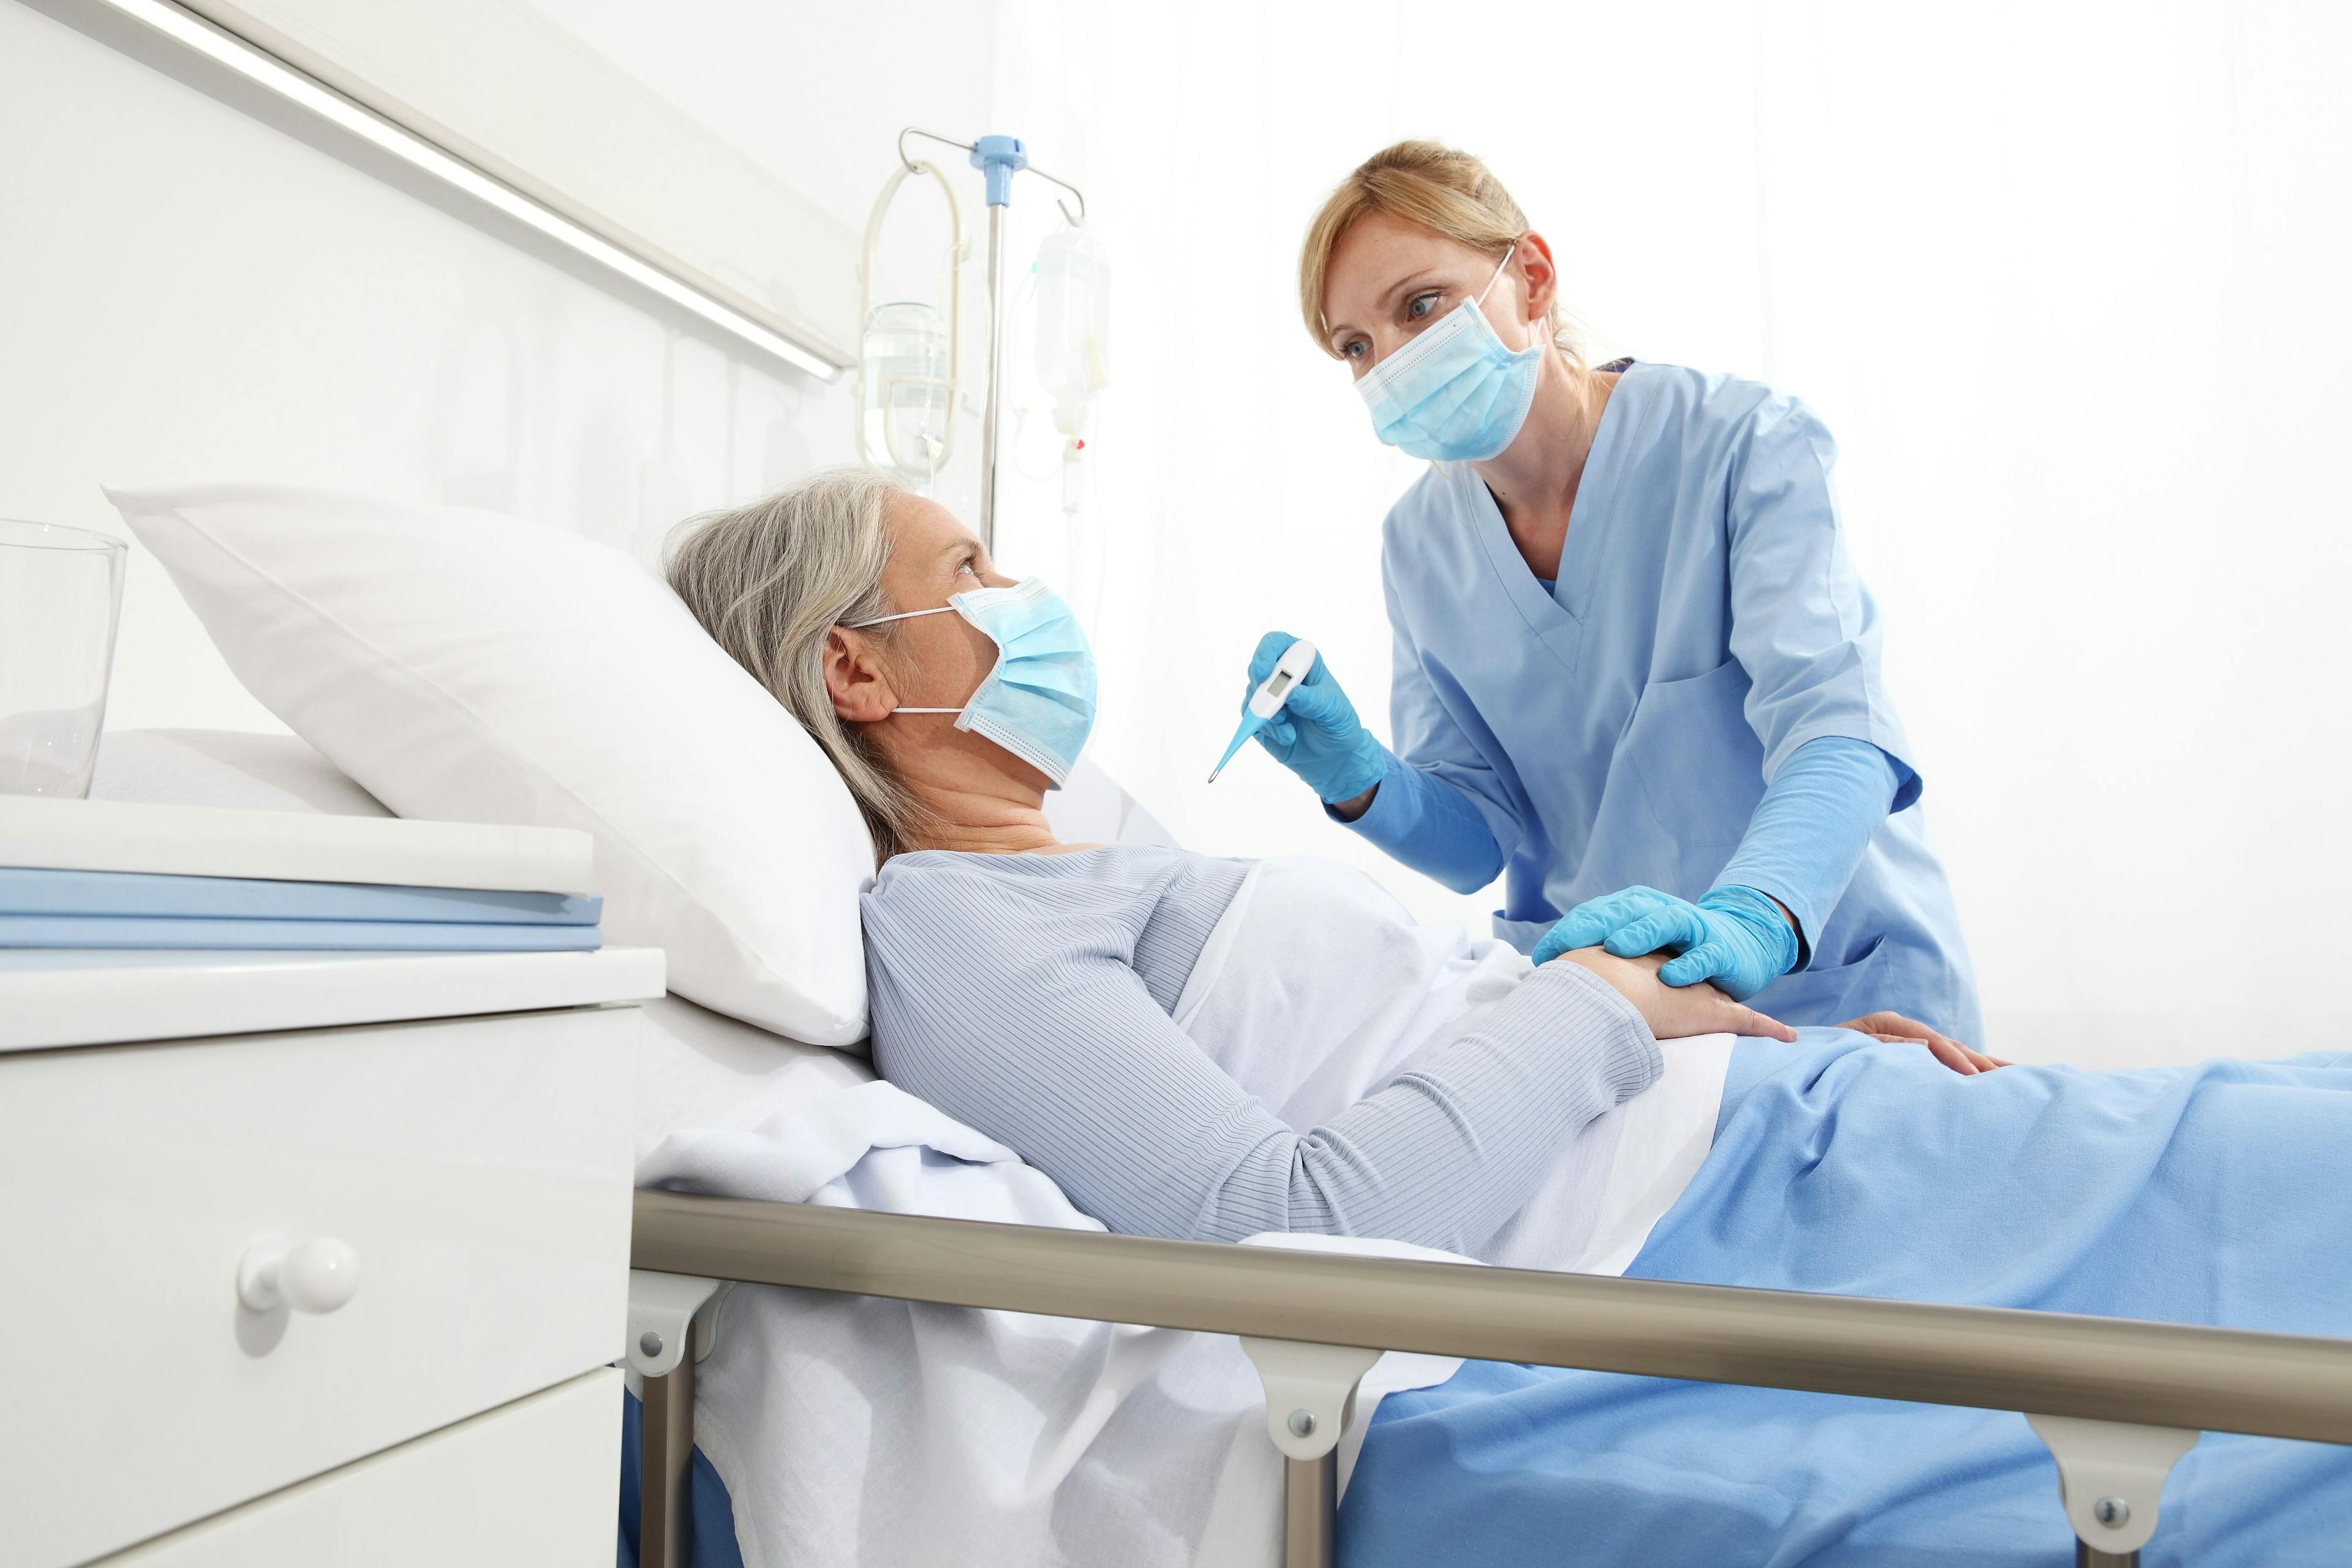 Health care worker taking a hospitalized patient's temperature